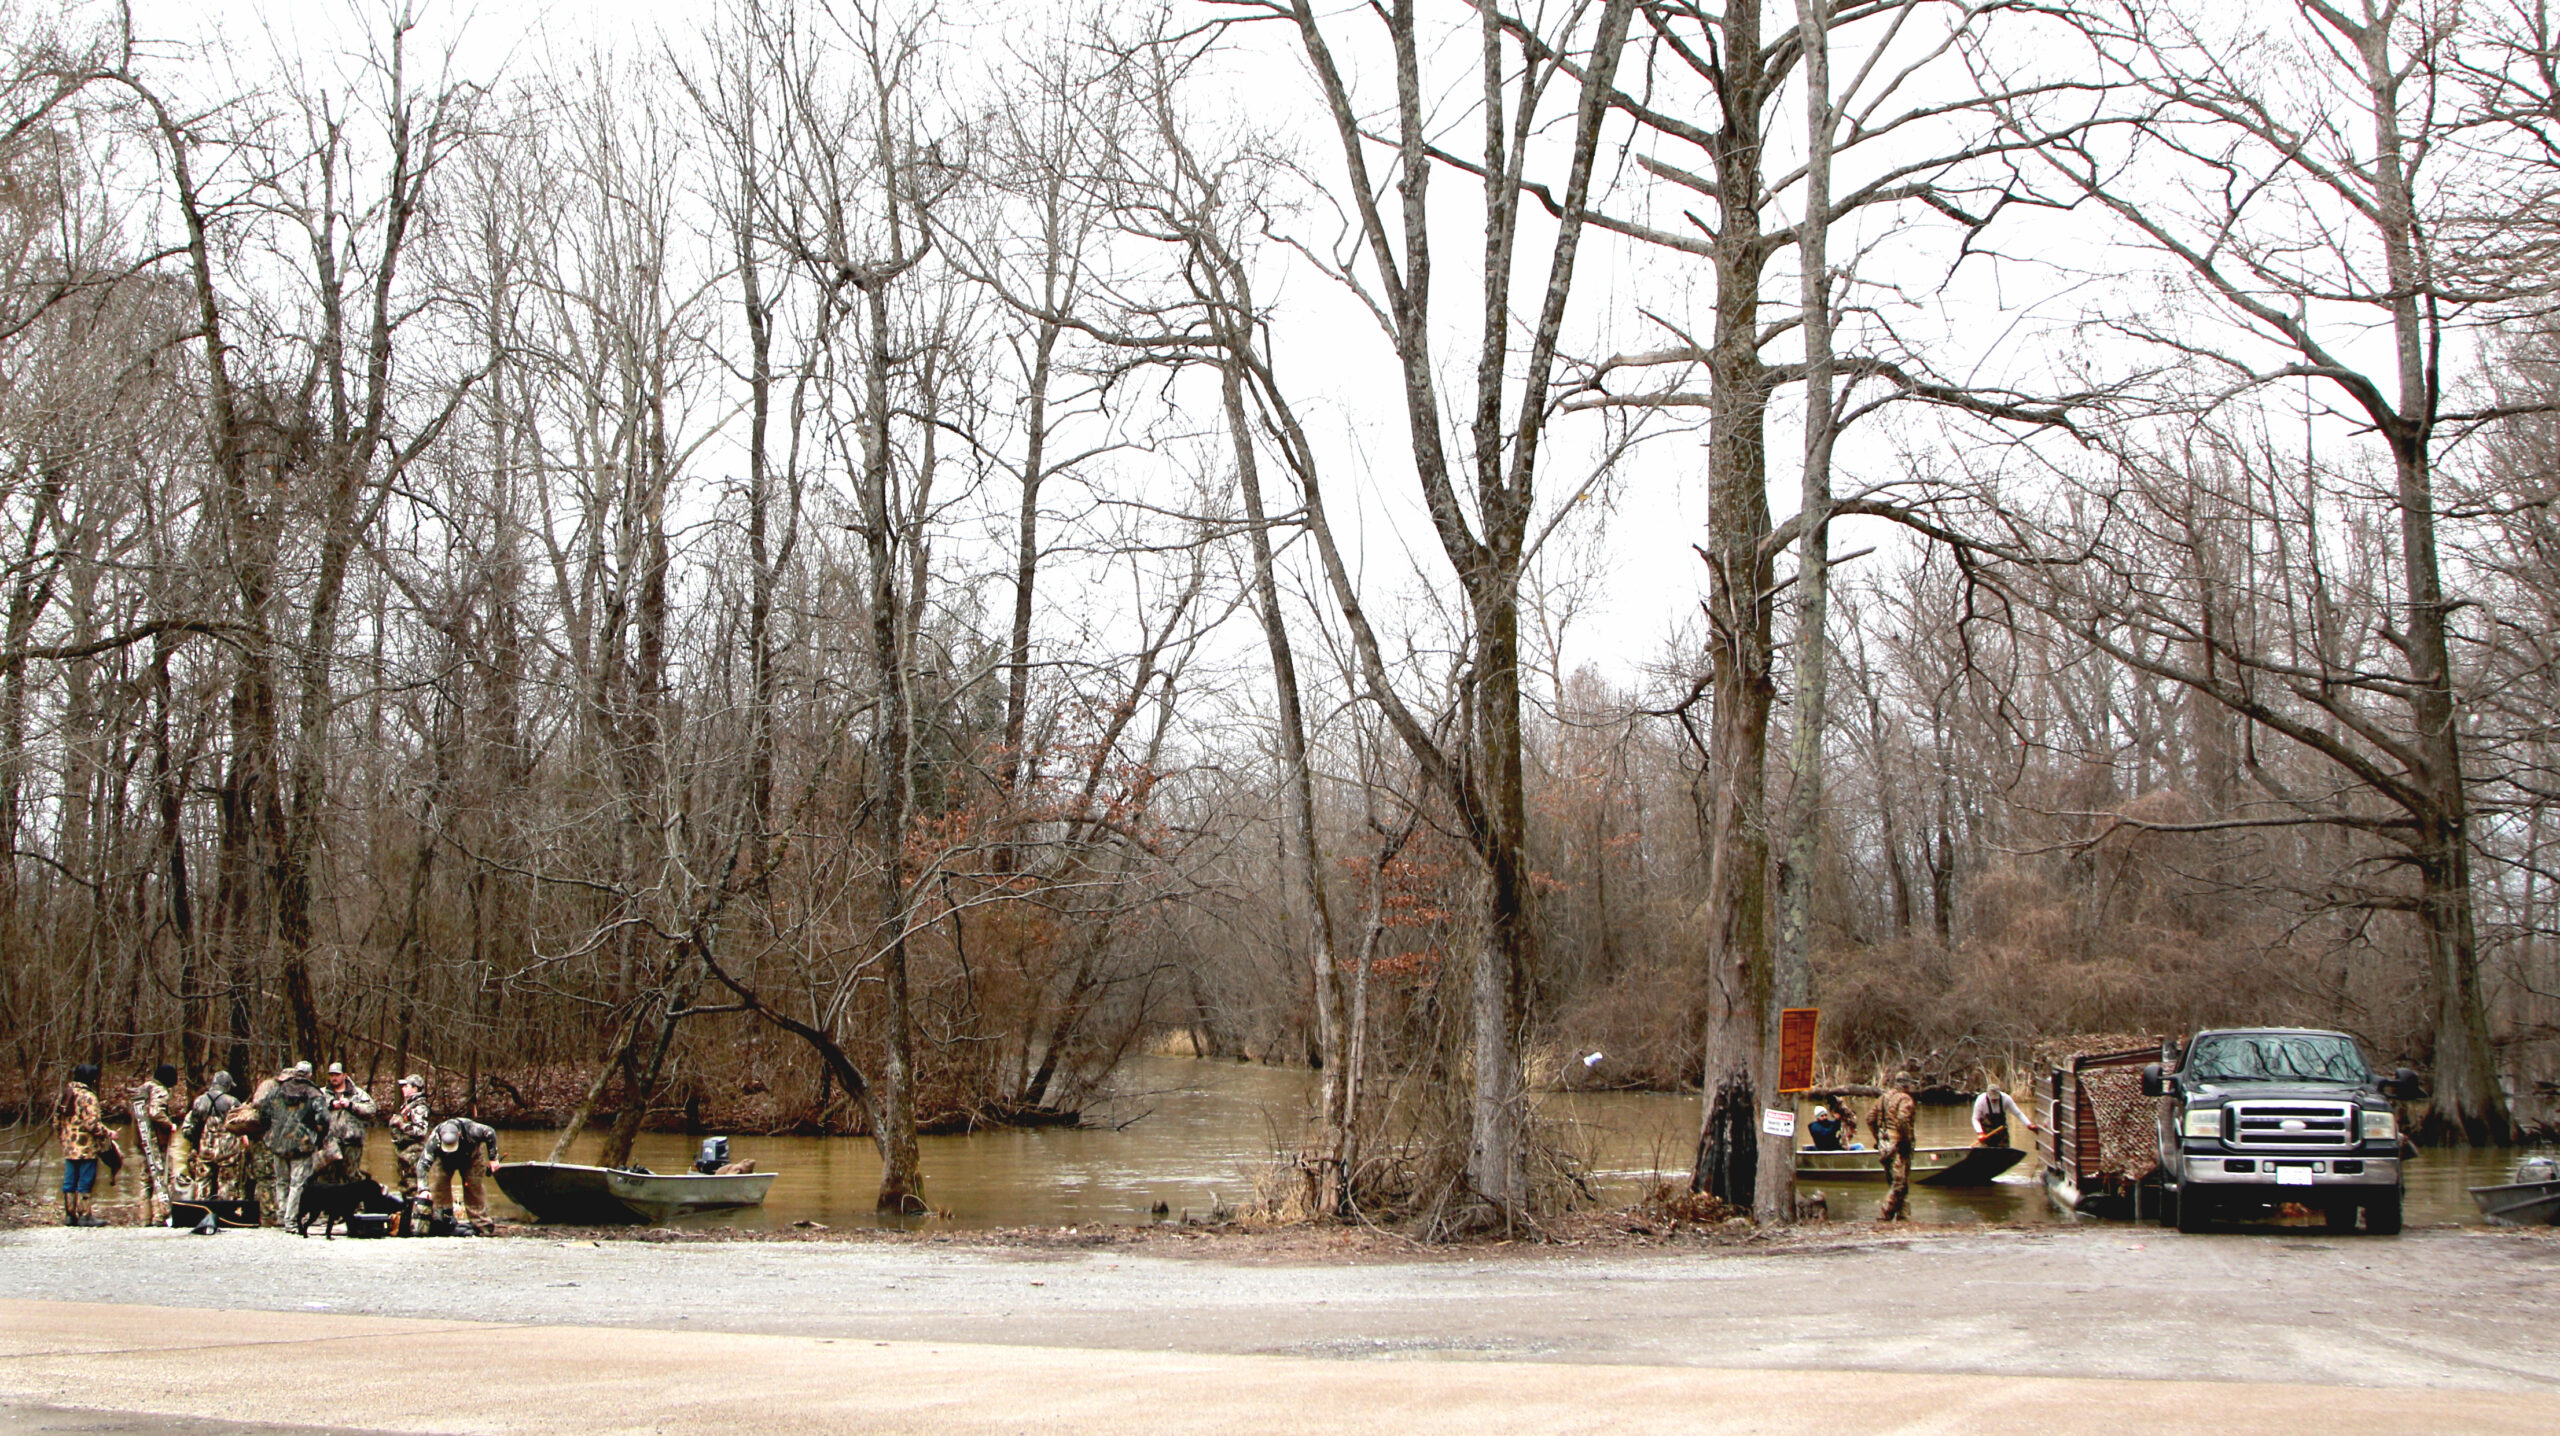 The Walnut Log Ditch boat ramp, used by Reelfoot Lake duck hunters.